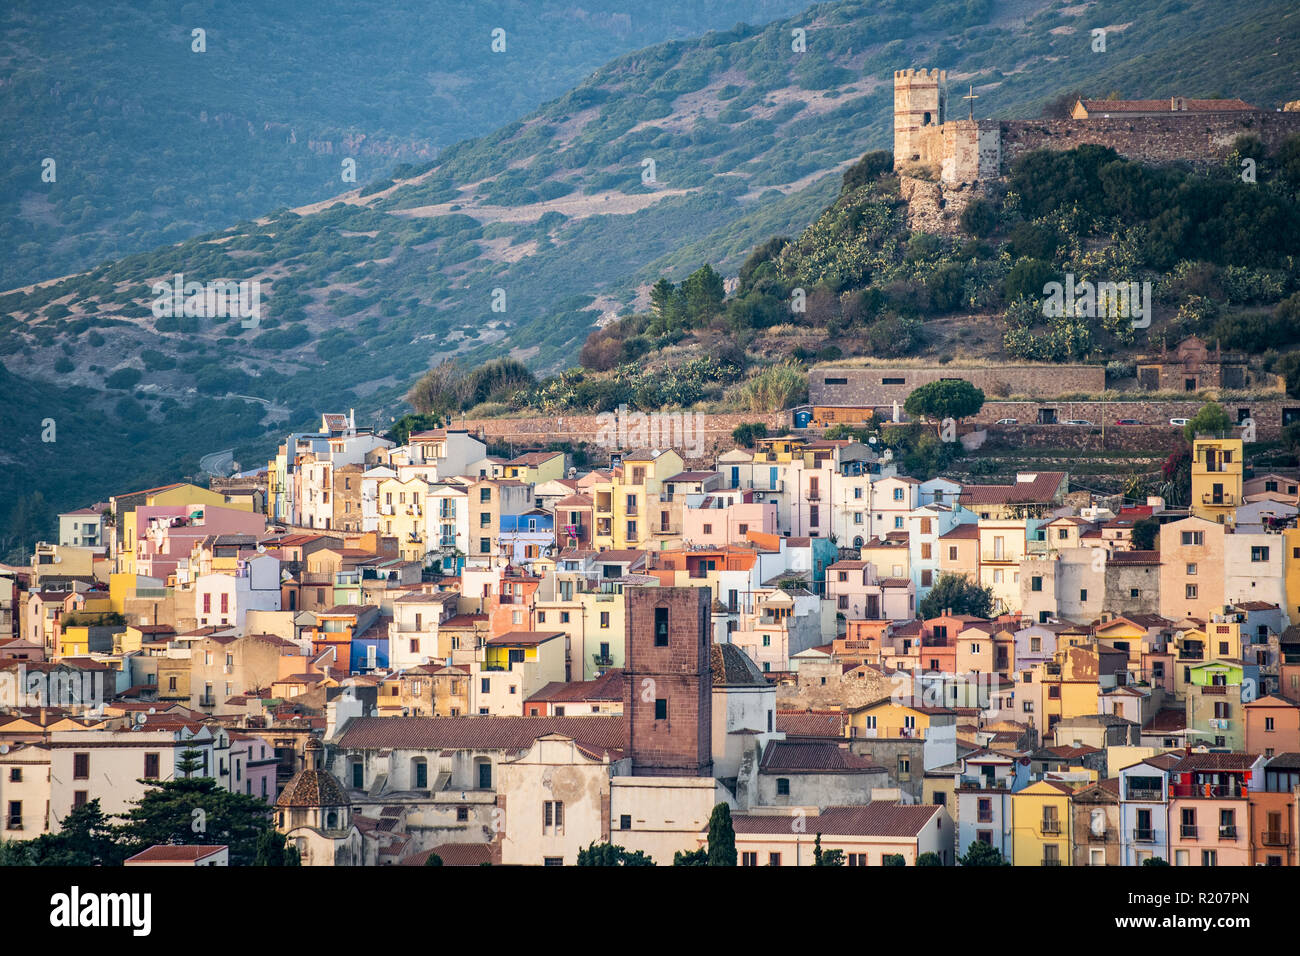 The beautiful village of Bosa with colored houses and a medieval castle on the top of the hill. Bosa is located in the north-west of Sardinia, Italy. Stock Photo